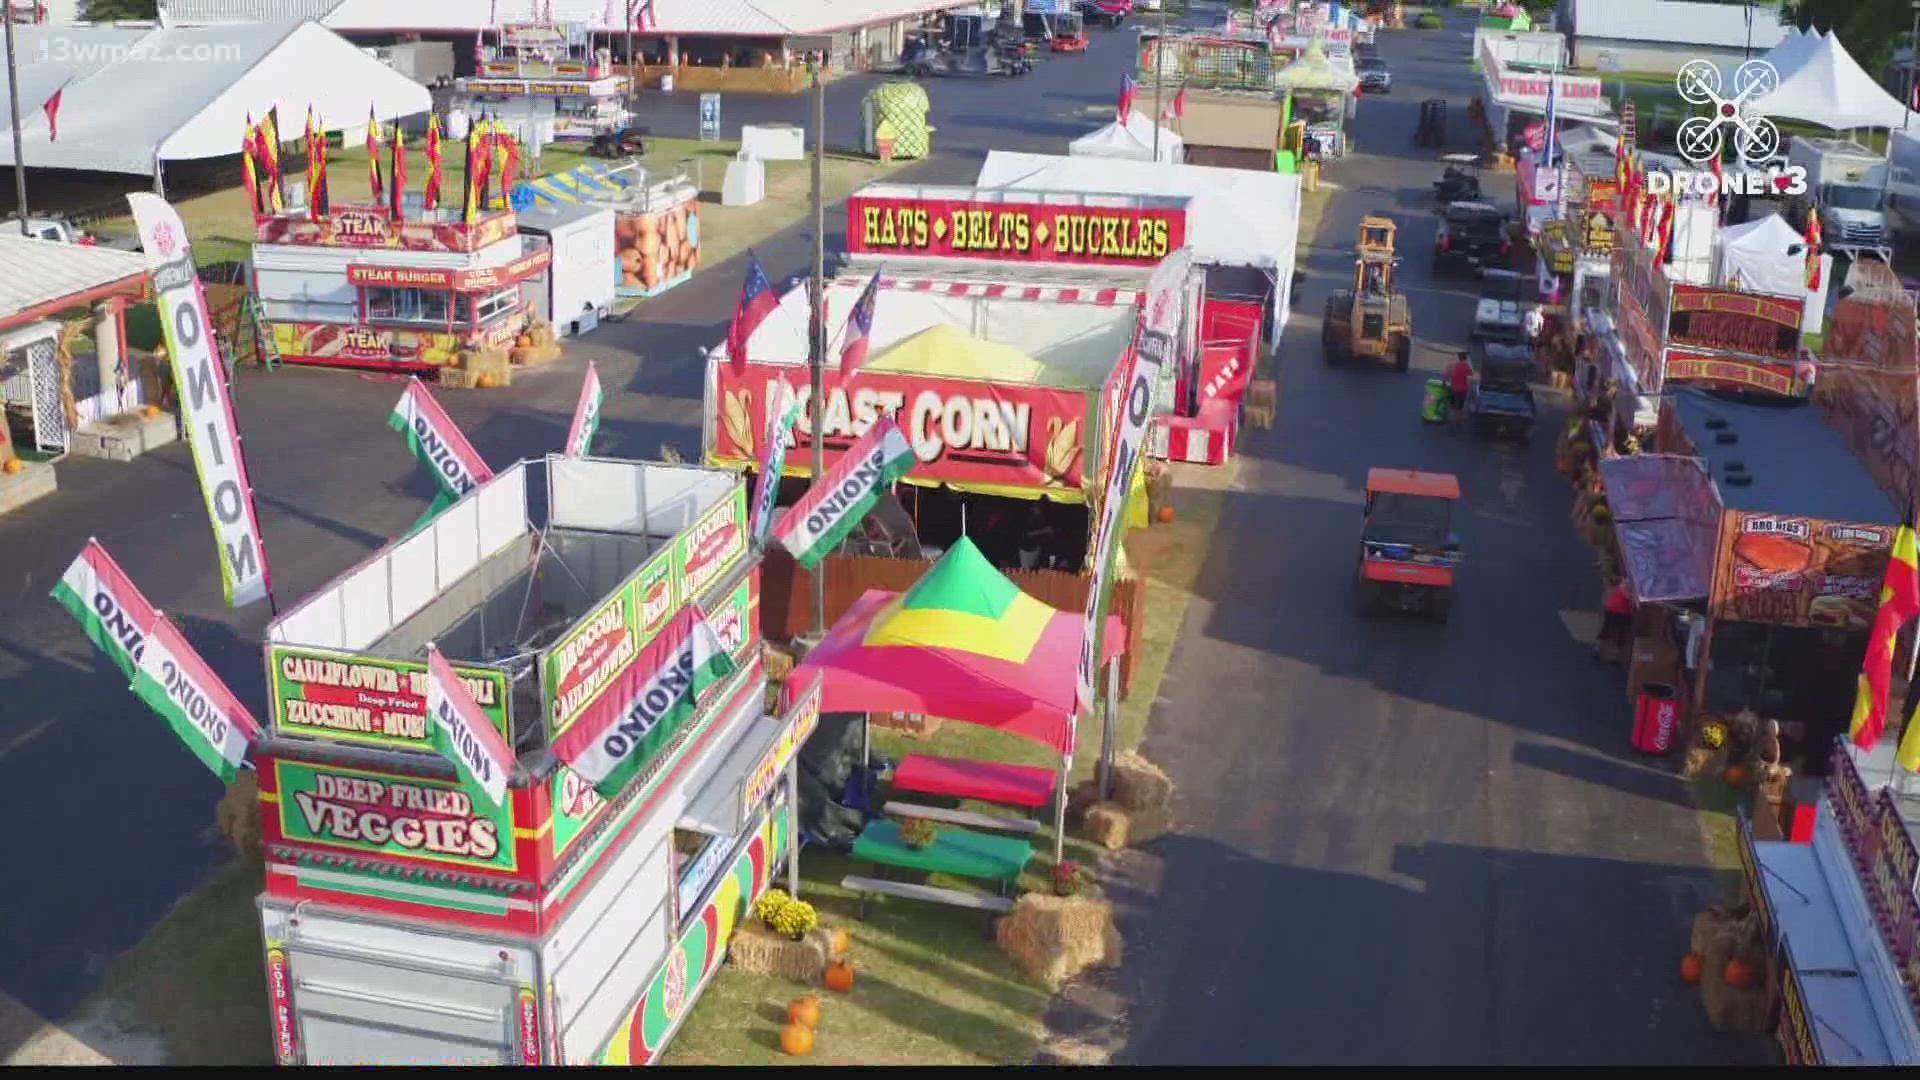 Losing the fair in 2020 showed what an impact it has on the community and how many people rely on it for their livelihood.